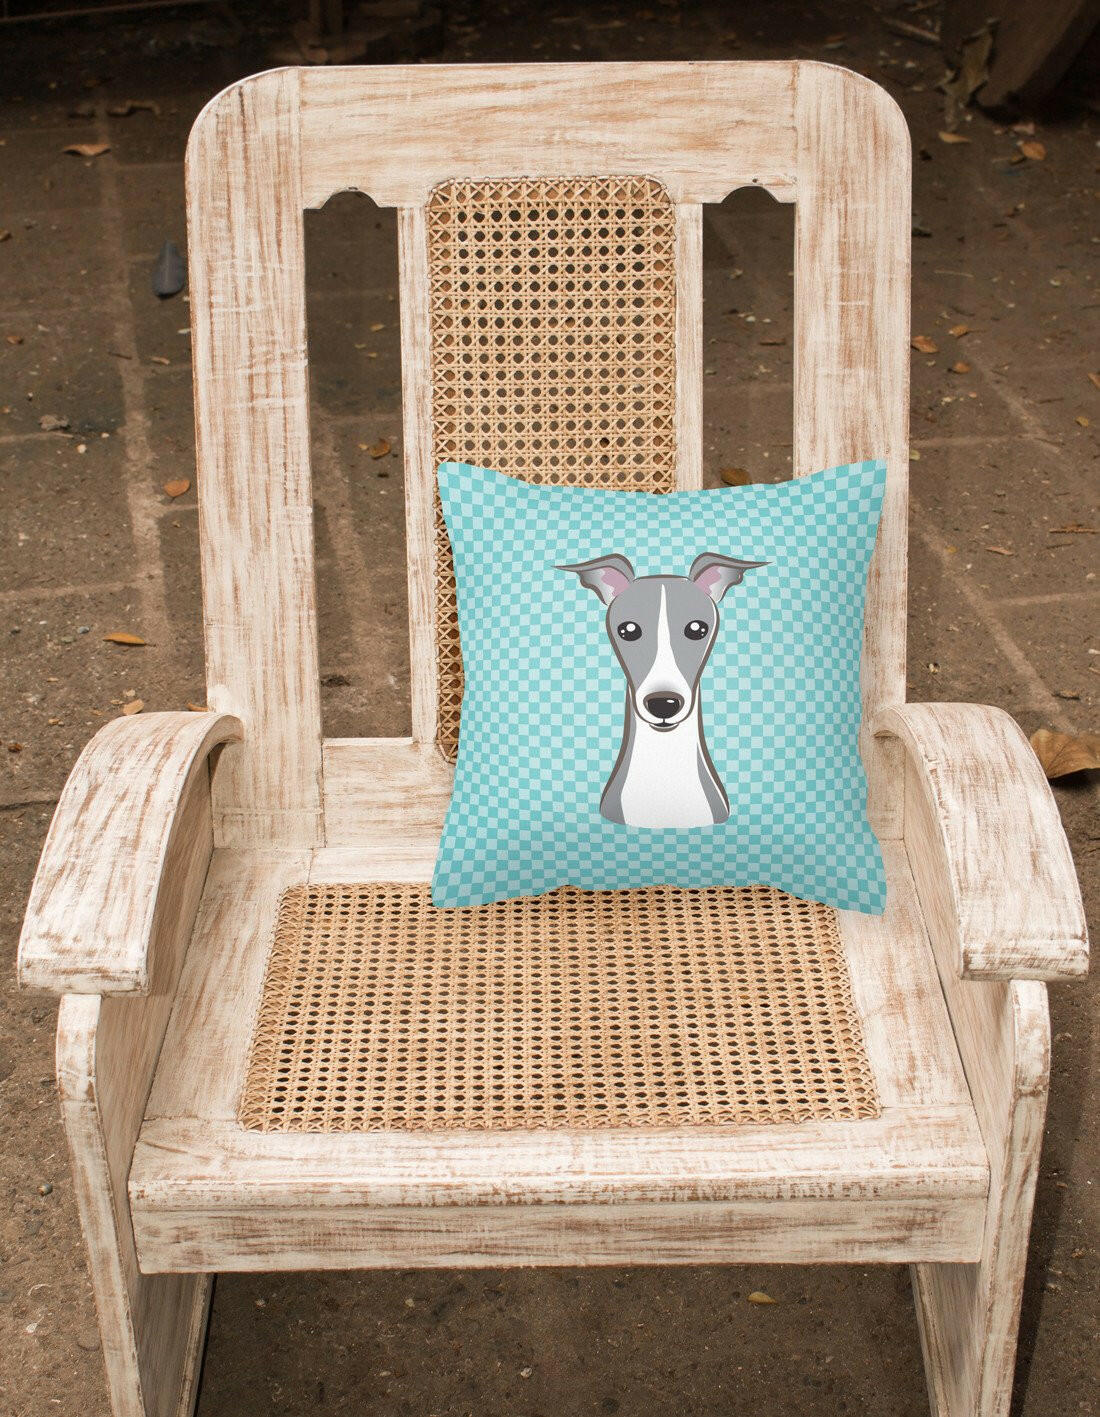 Checkerboard Blue Italian Greyhound Canvas Fabric Decorative Pillow BB1174PW1414 - the-store.com